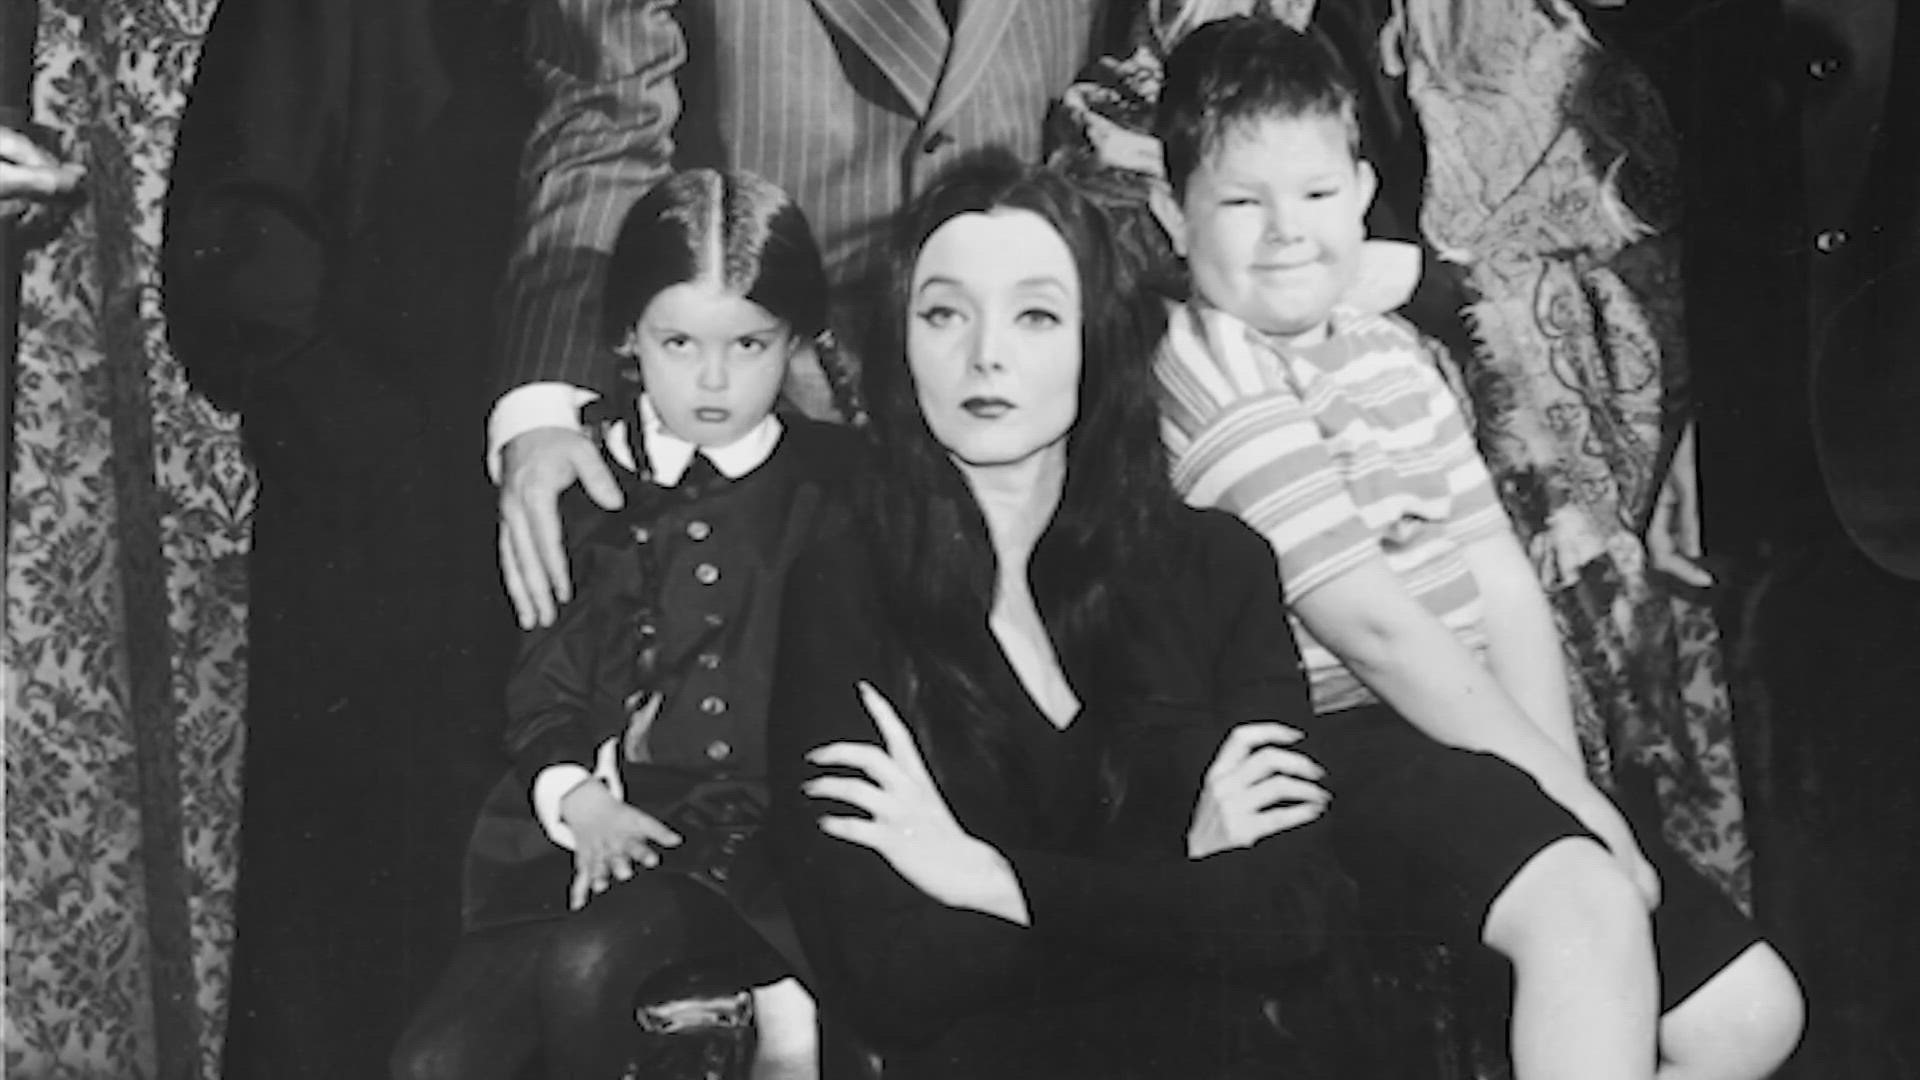 Lisa Loring the actress best known for playing Wednesday in "The Addams Family" series has died.